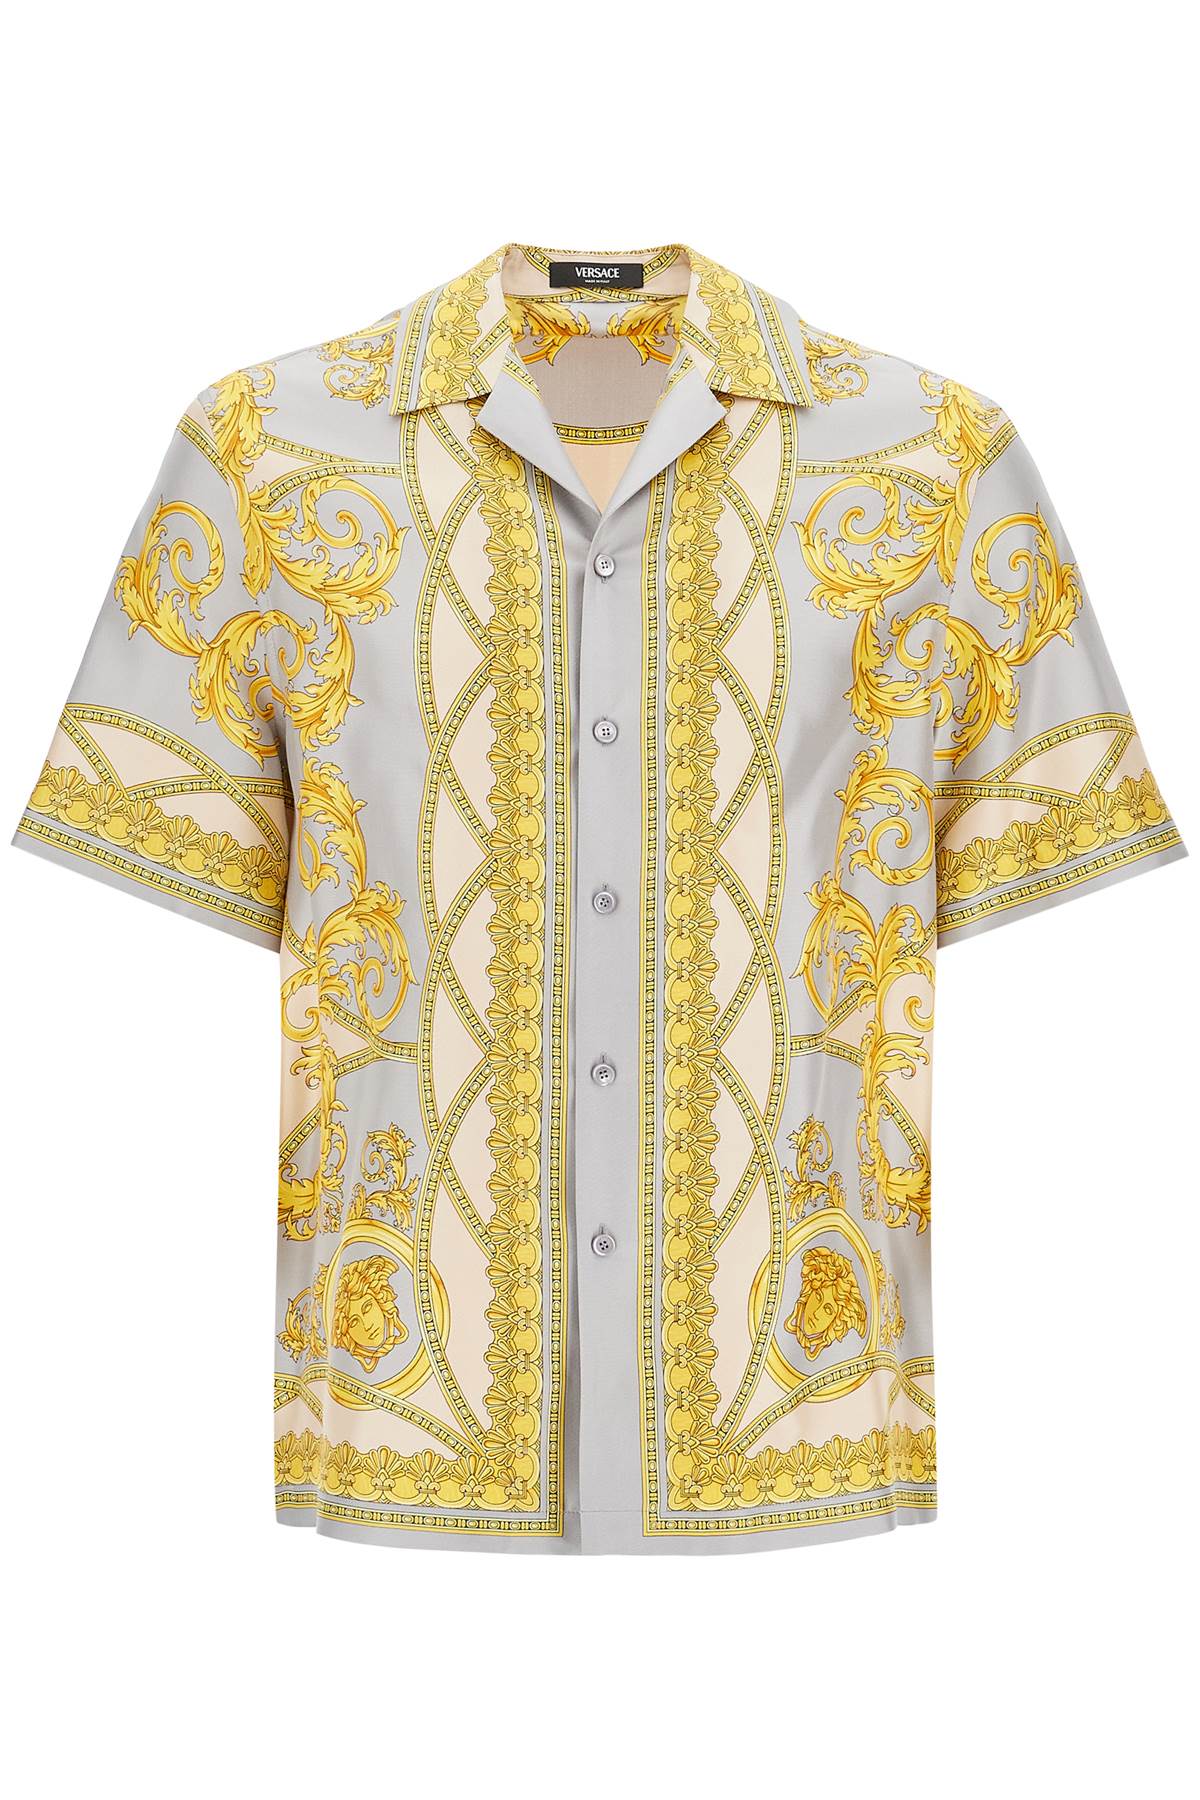 Versace VERSACE "printed silk bowling shirt from the gods' collection